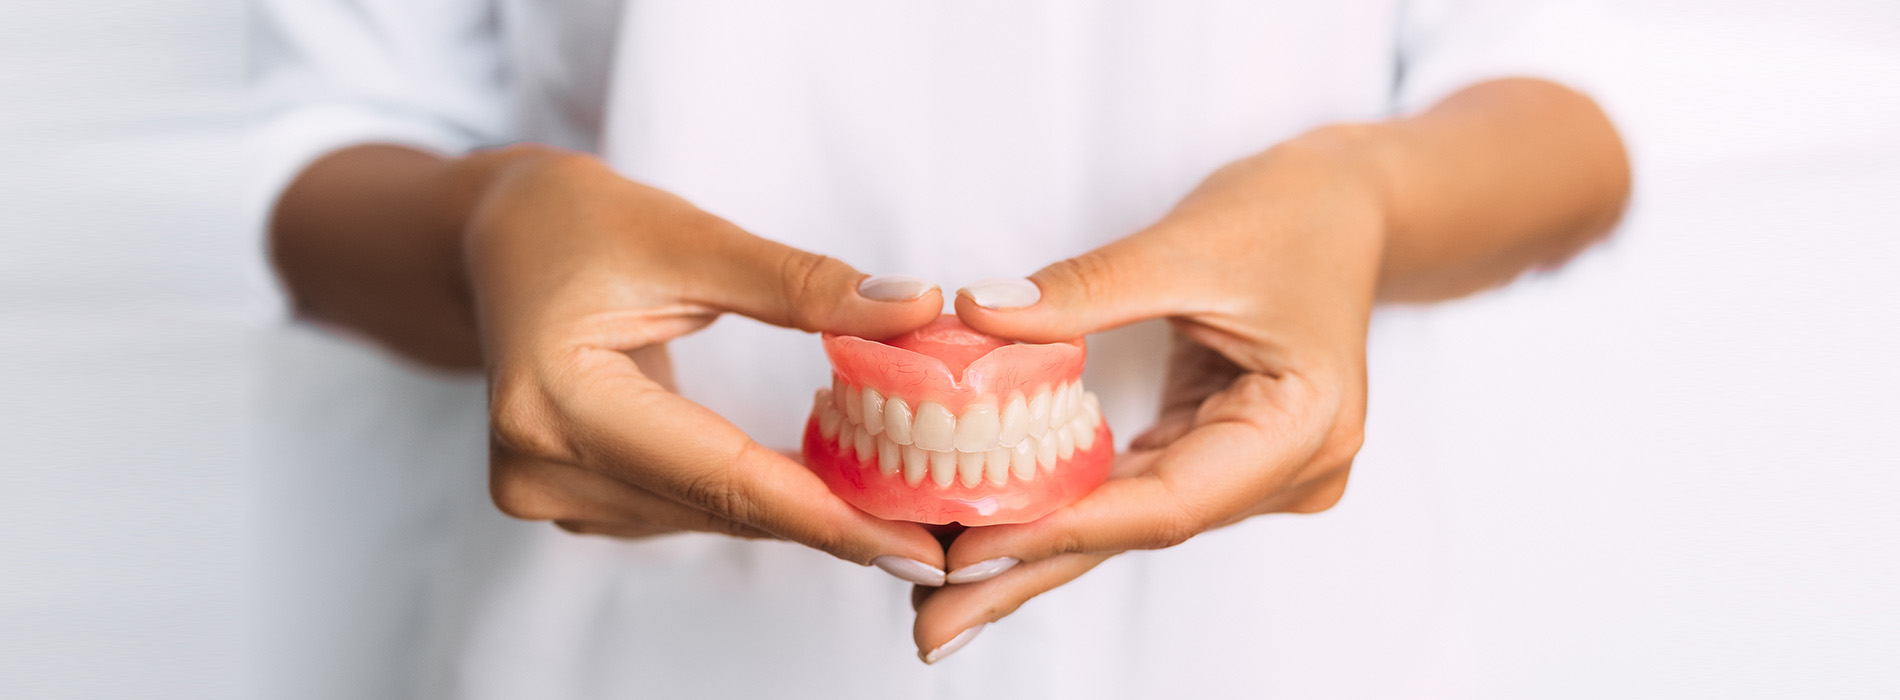 The image shows a person s hands holding a pair of dentures, with the focus on the dental appliance, set against a blurred background.